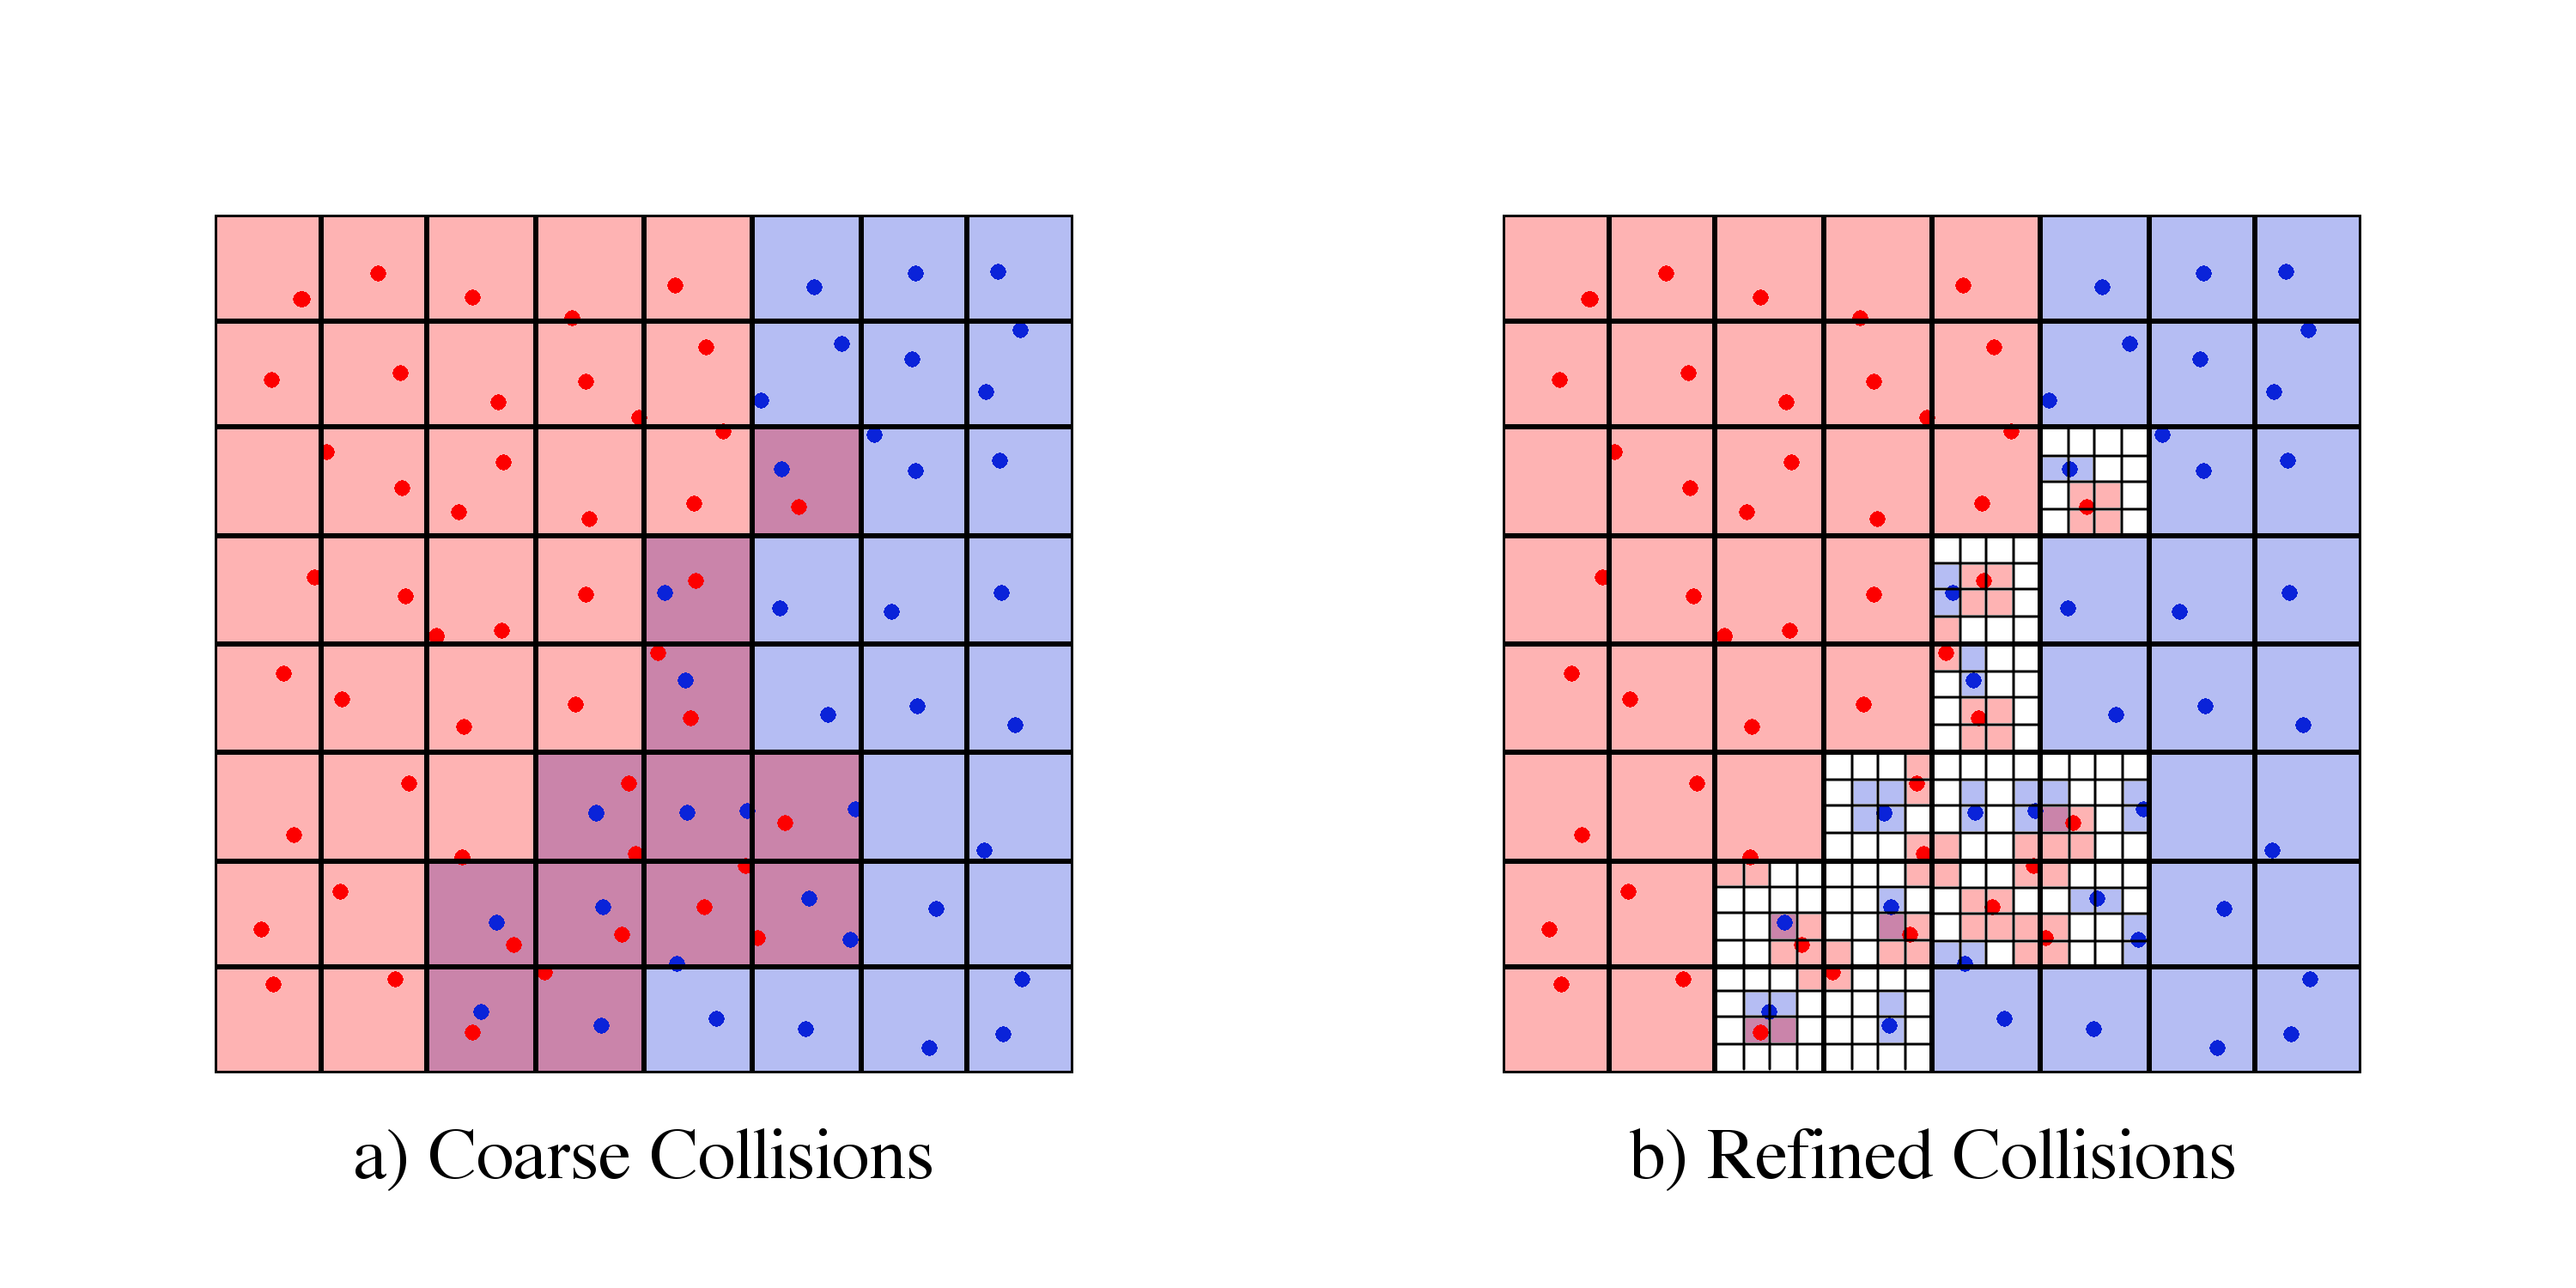 Figure 19: Examples of a collision between two files. The red points and blue points are contained by two different files. The larger grid in both panels denotes the boundaries of 3rd order Morton cells. The cells containing points from either file are shaded accordingly such that cells containing points from both files are purple. The smaller grids within these cells on the right are the boundaries of 2nd order Morton cells refining the collisions.